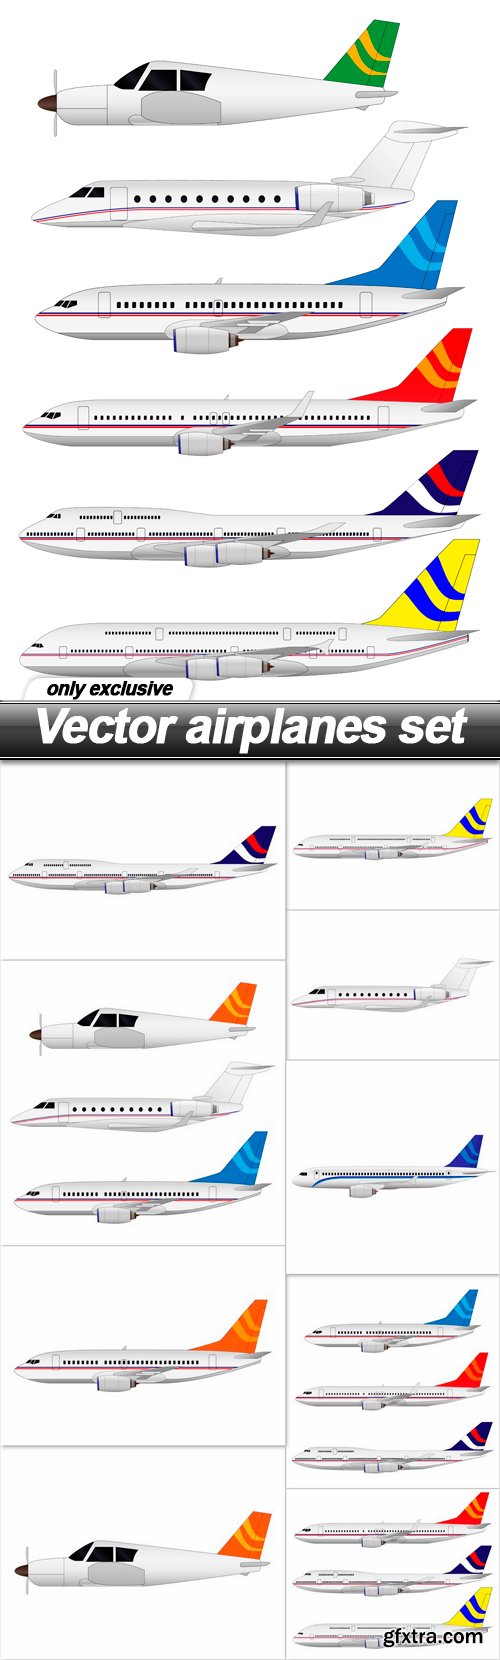 Vector airplanes set - 10 EPS